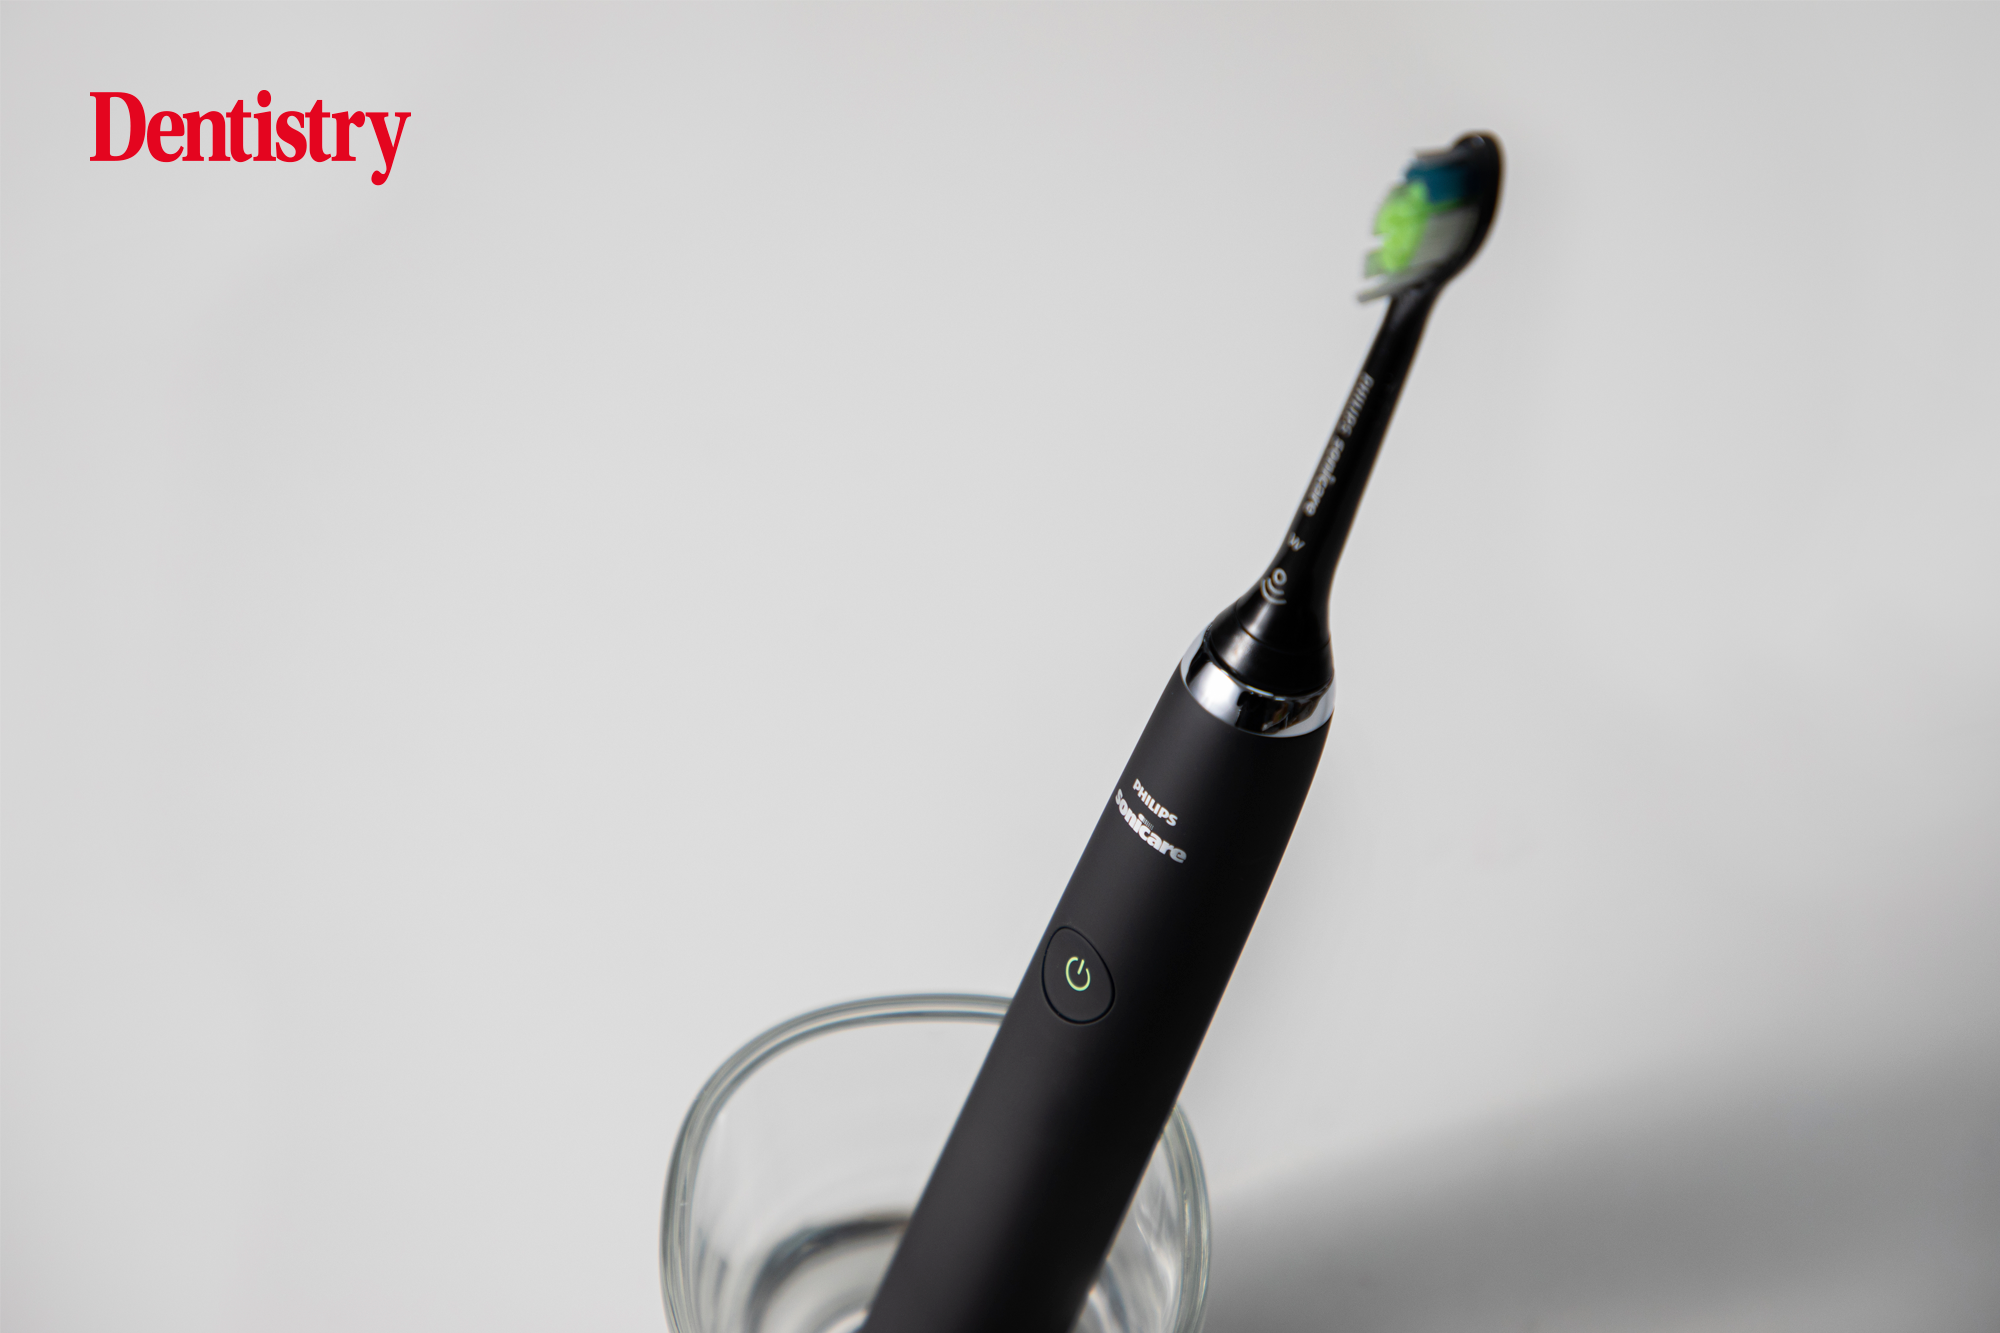 'Why I recommend Philips Sonicare'